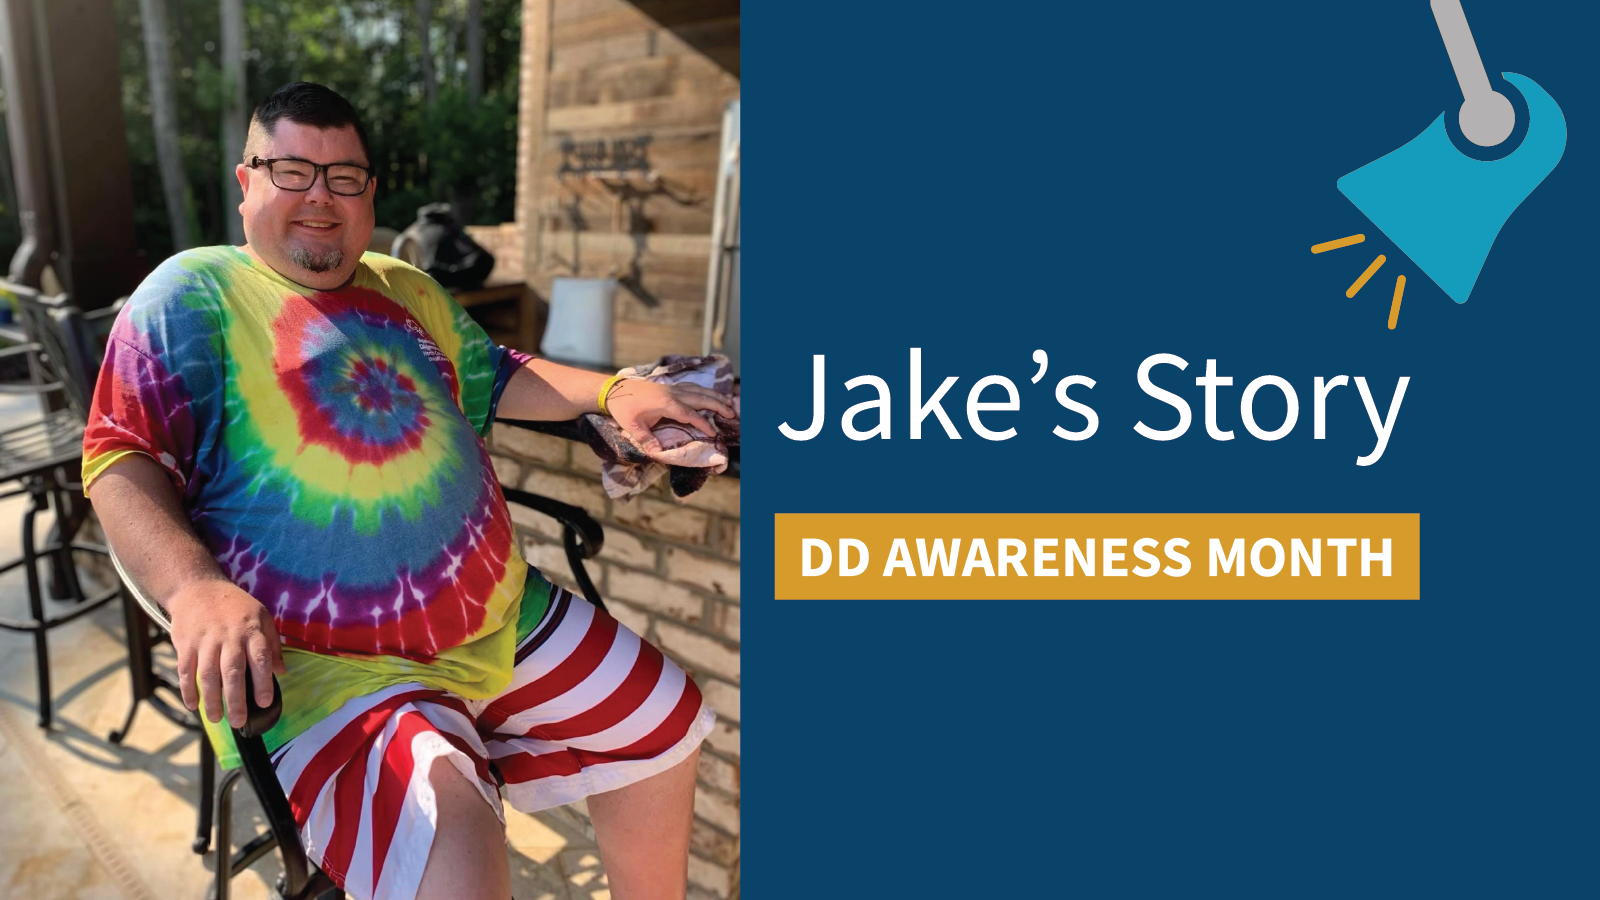 An image of an individual next to the words "Jake's Story" and a banner that says "DD Awareness Month", with a spotlight graphic shining down on the words.